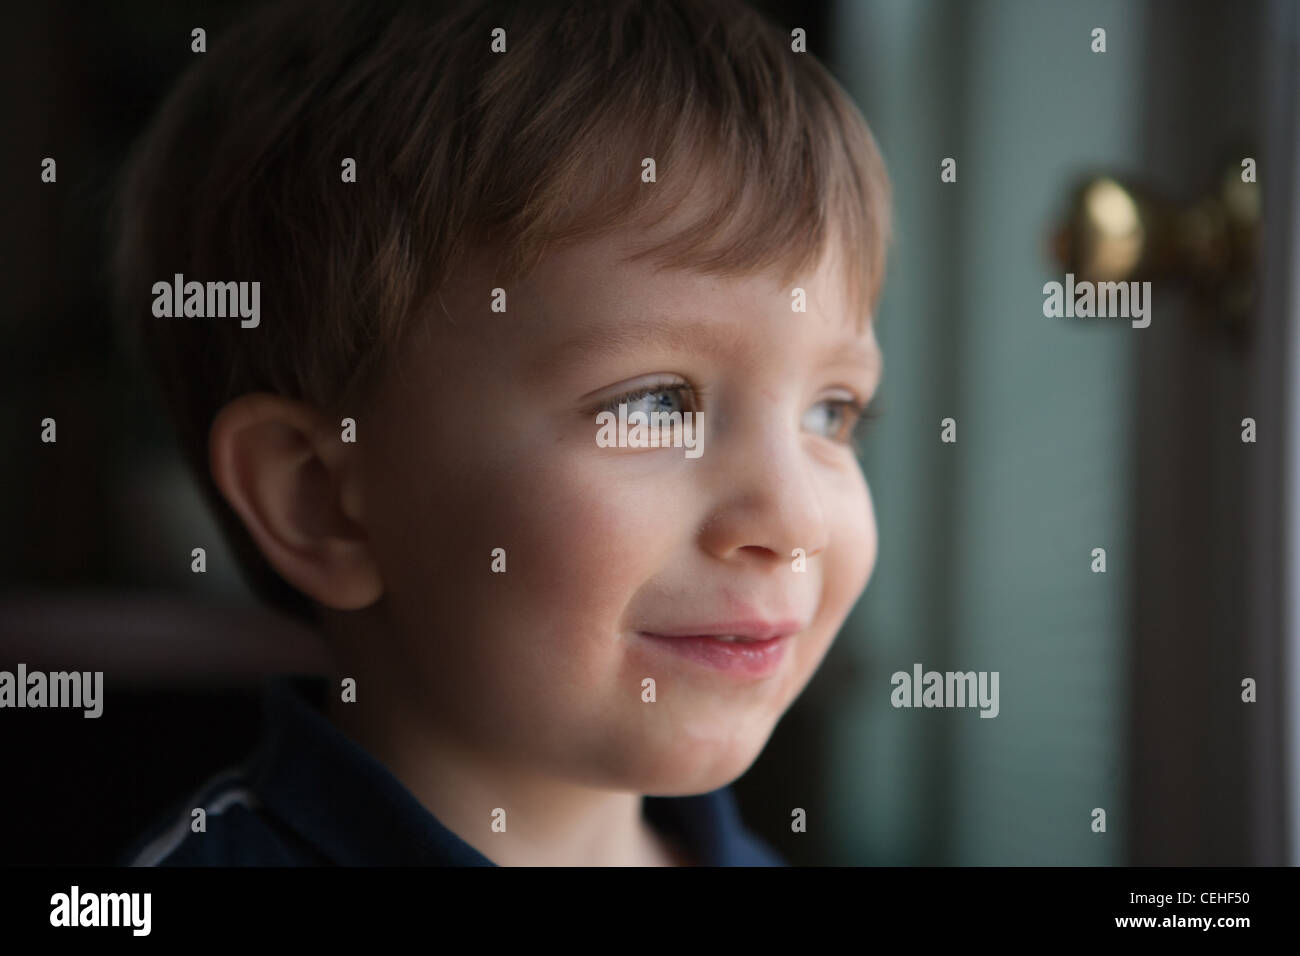 Two year old boy looking out the window, looking mischevious, smiling. Stock Photo